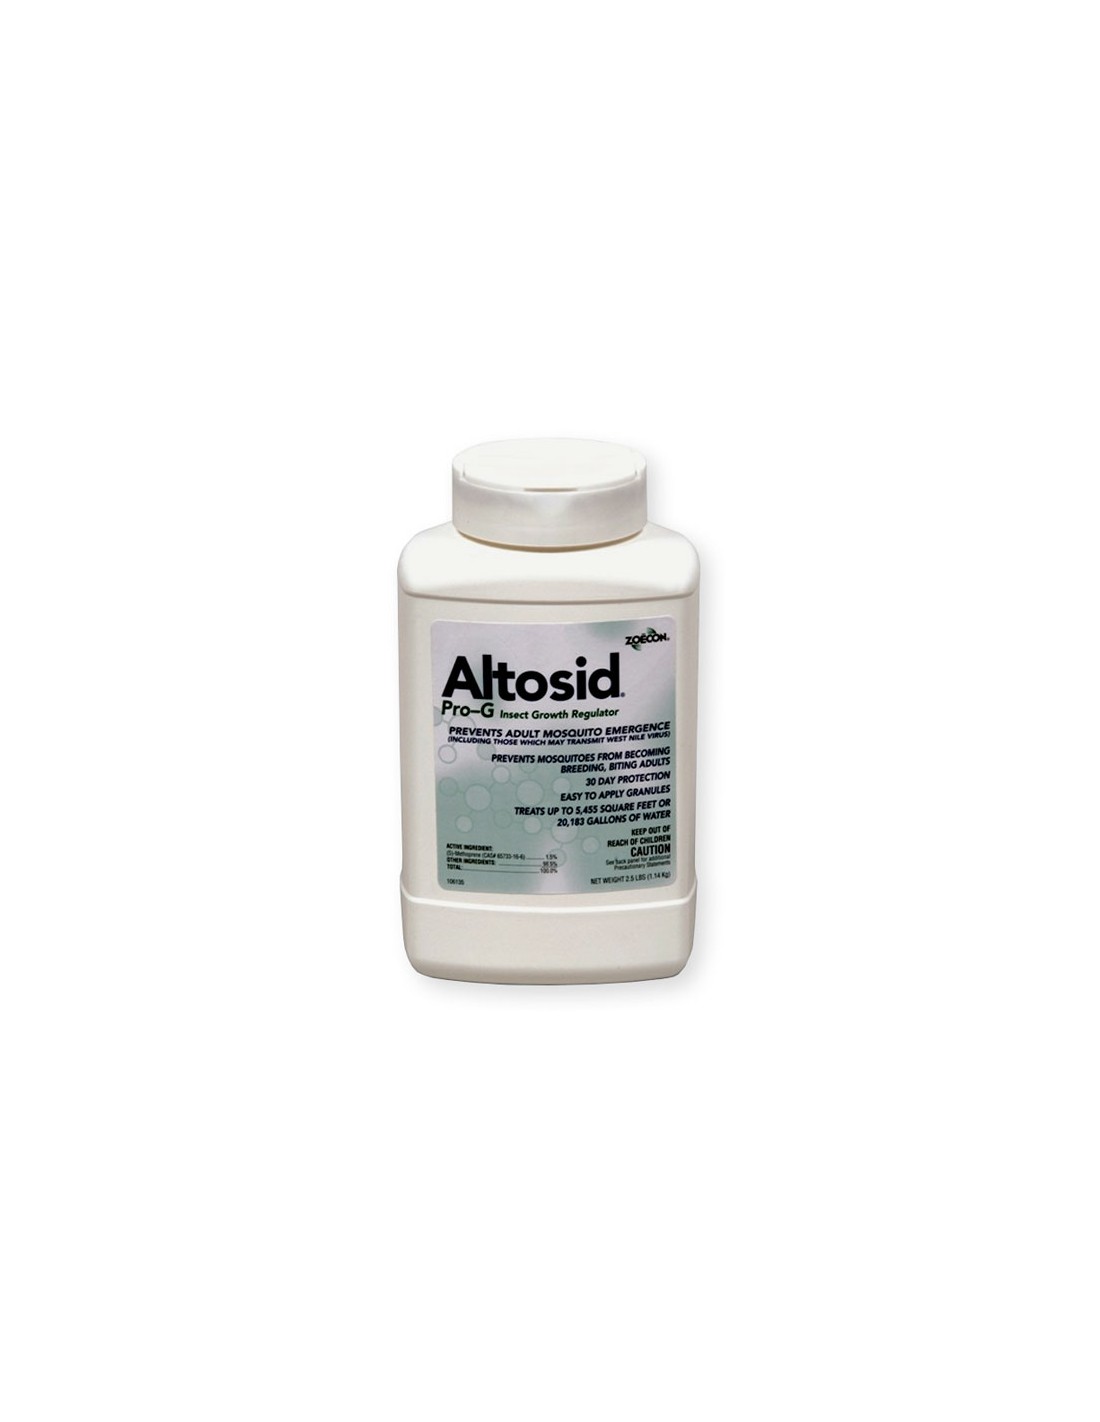 Altosid Pro G Insect Growth Regulator Questions & Answers